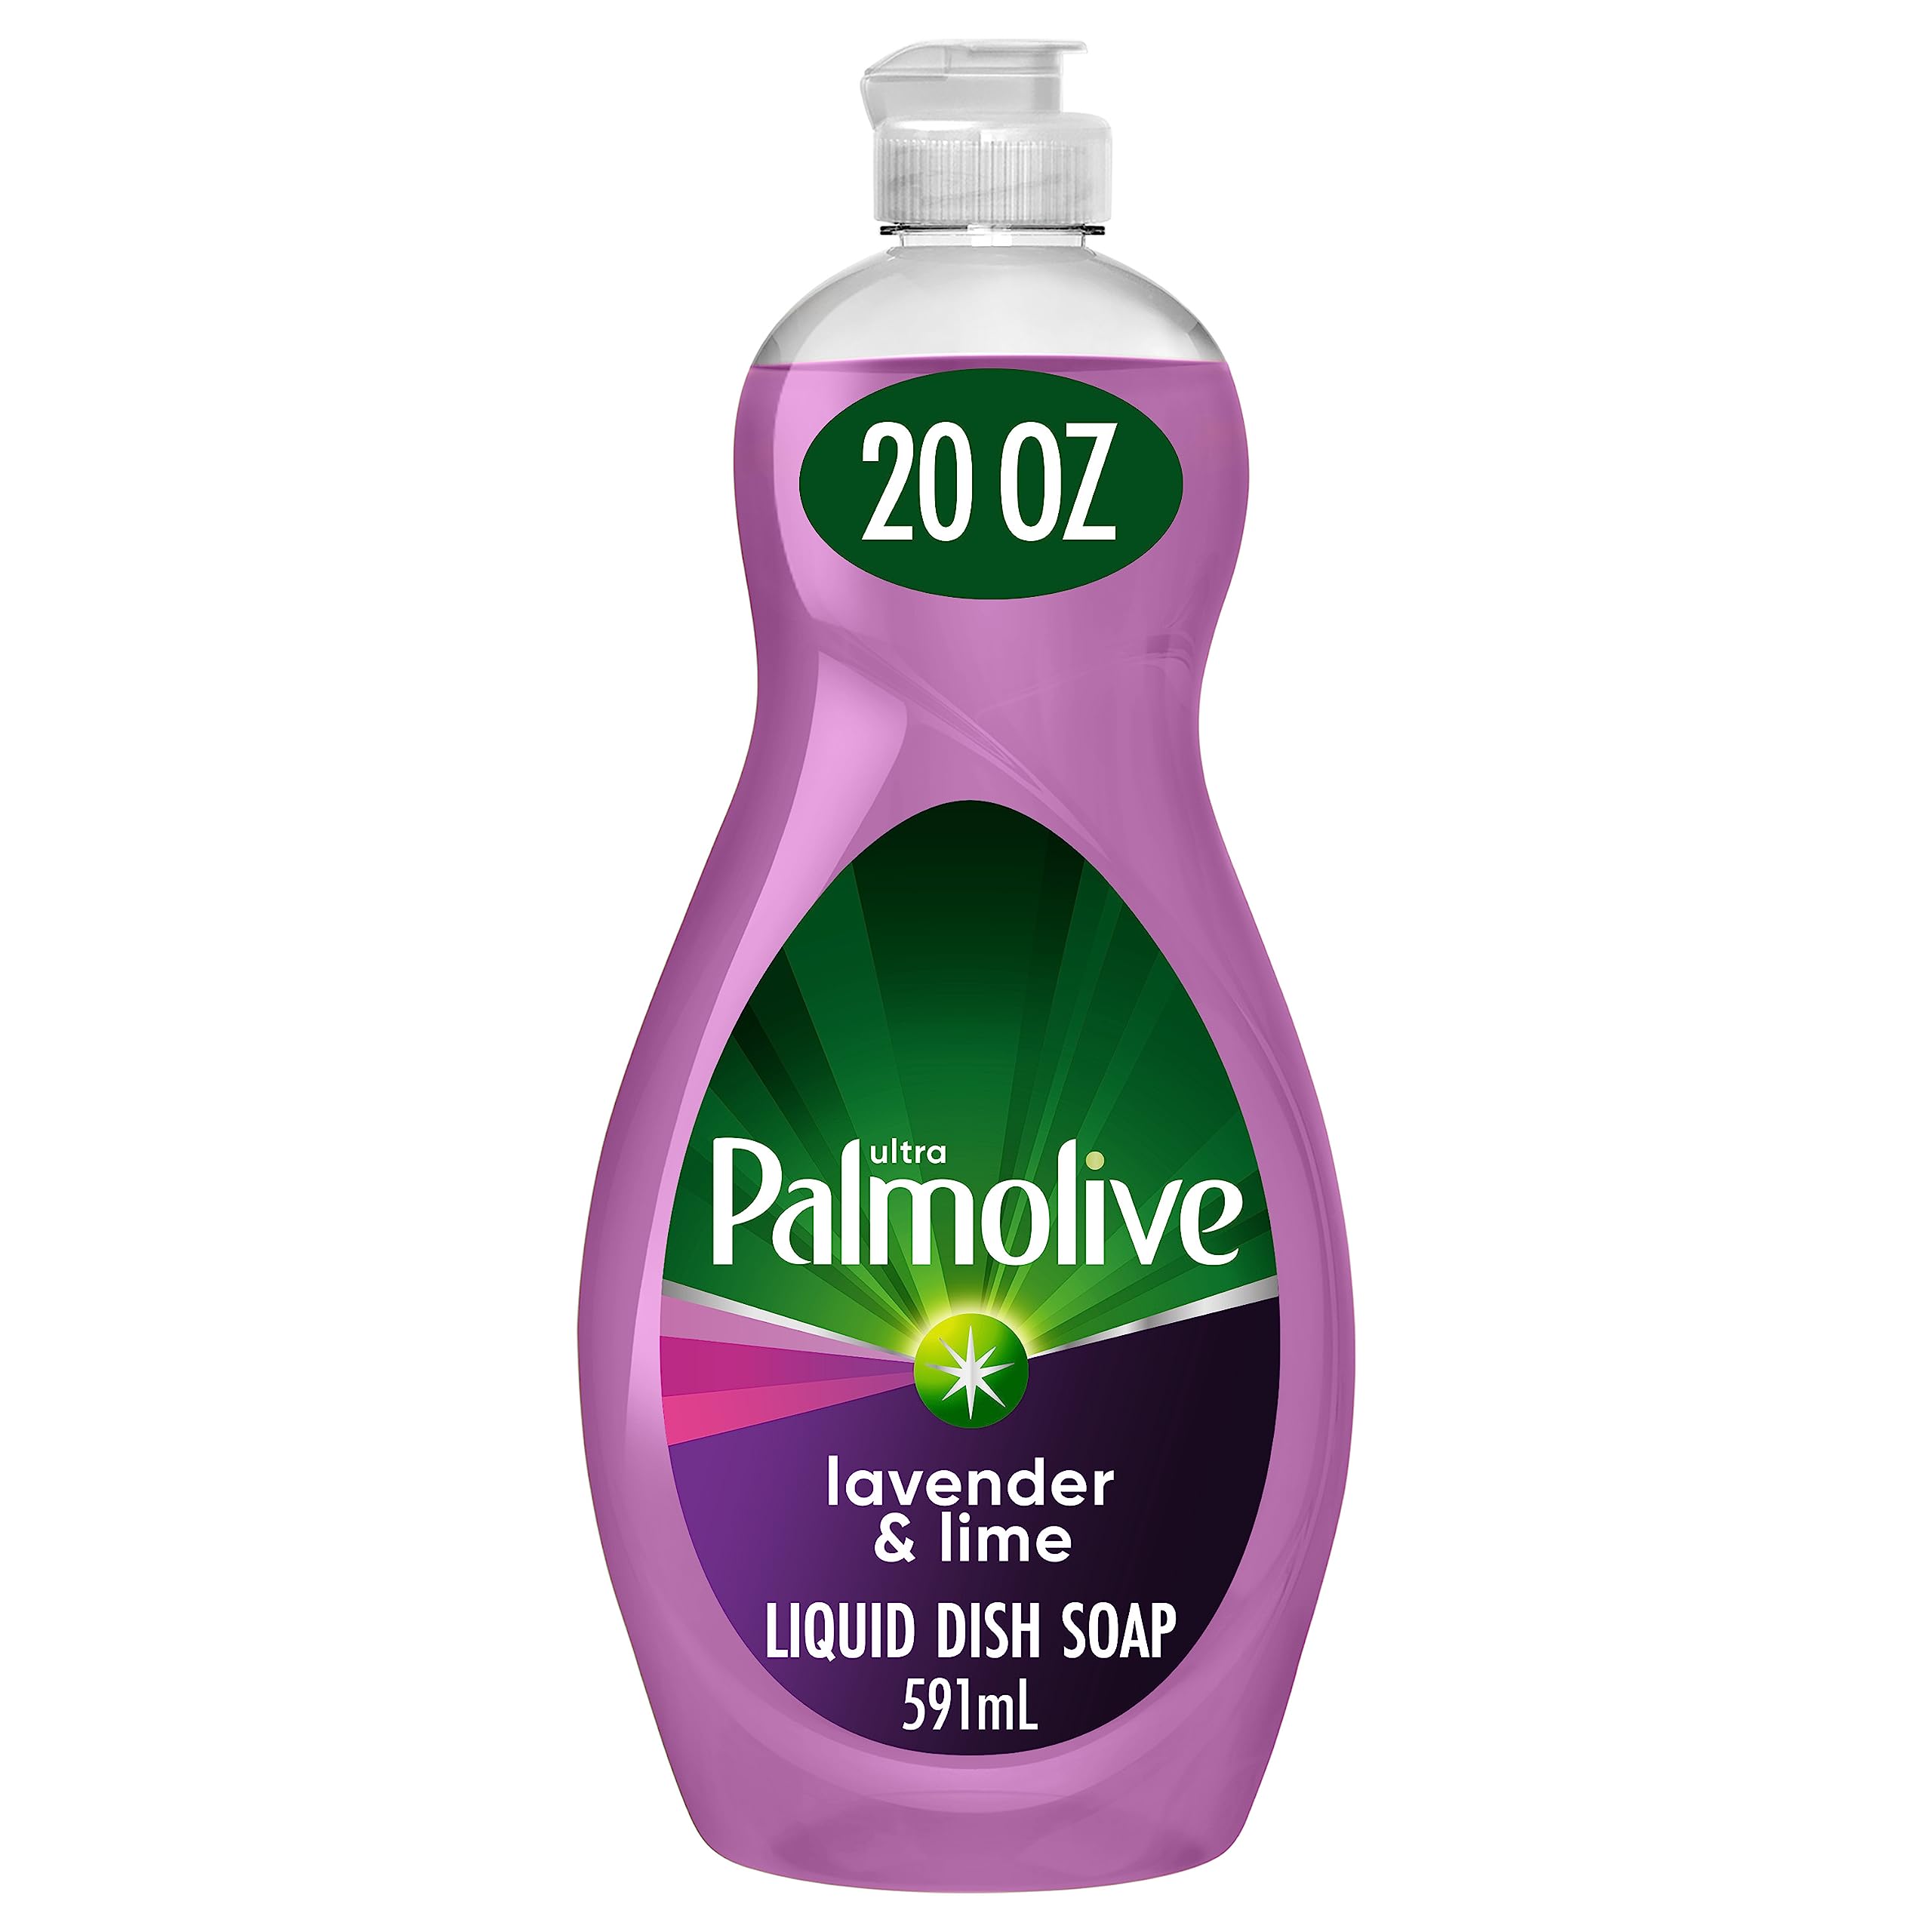 Palmolive Ultra Liquid Dish Soap, Lavender & Lime Scent, 20 Fl Oz (Pack of 1) $2 at Amazon